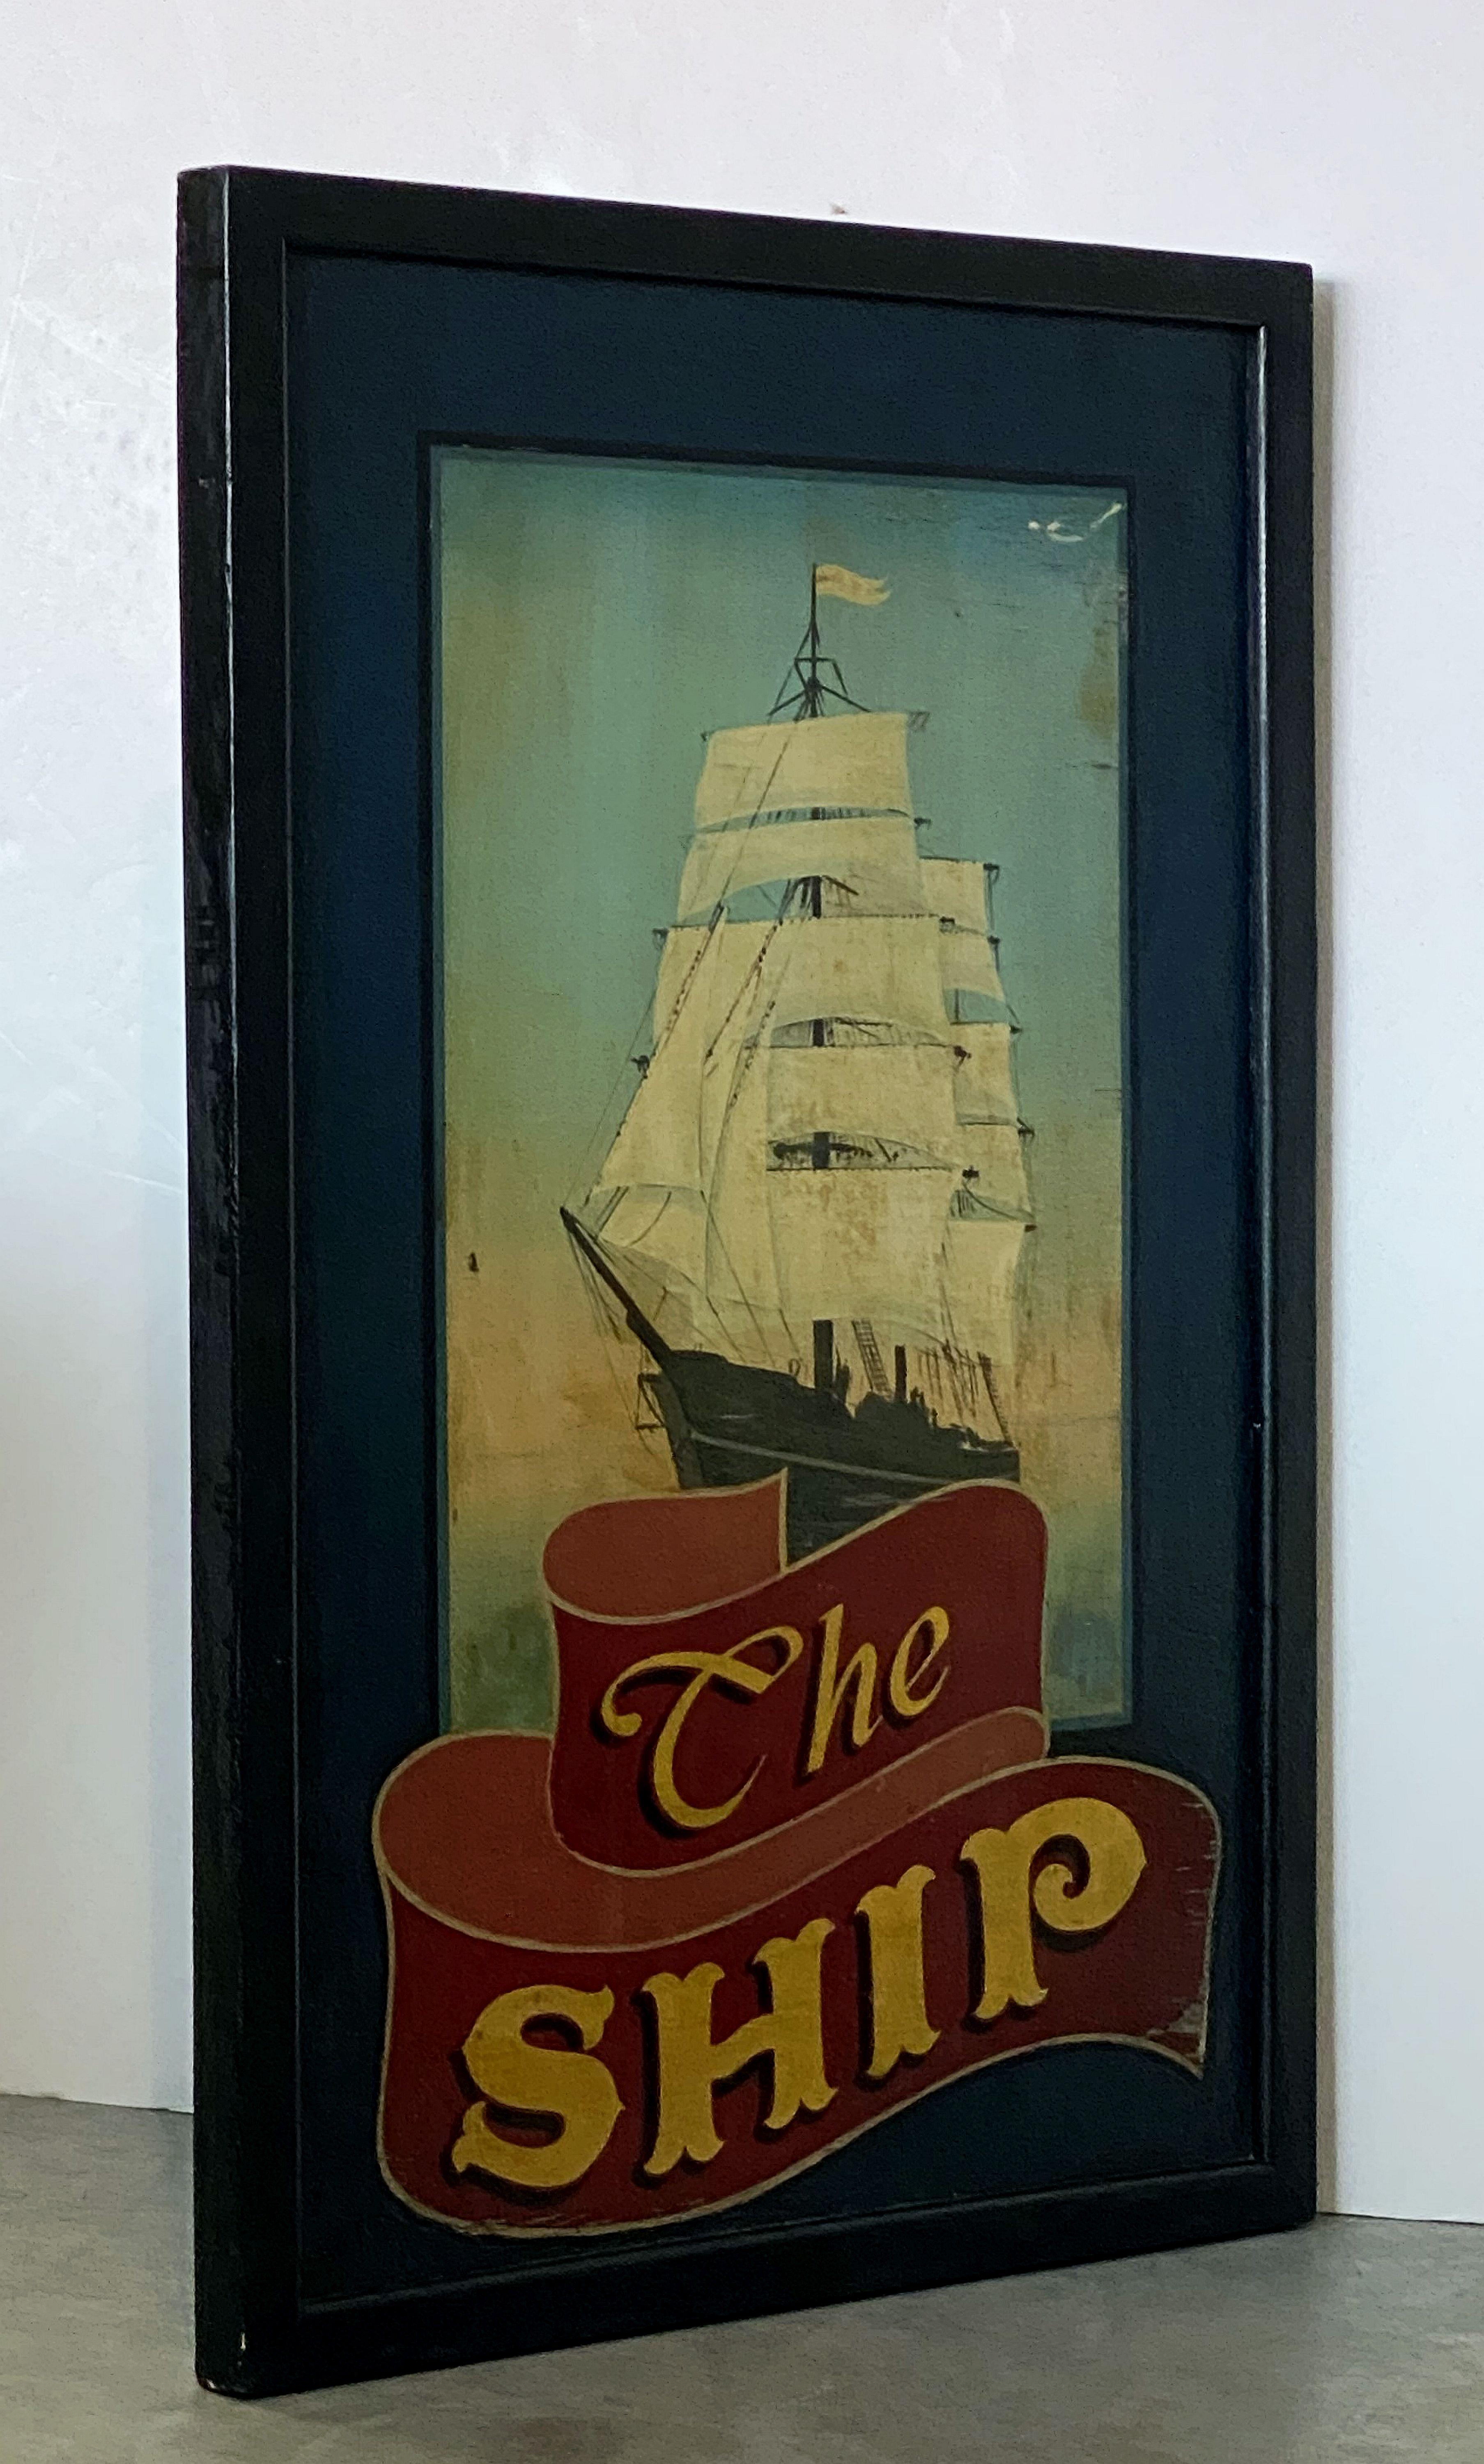 An authentic English pub sign (two-sided) featuring a painting of a sailing ship with billowing sails, entitled: The Ship.

A very fine example of vintage advertising artwork, ready for display.